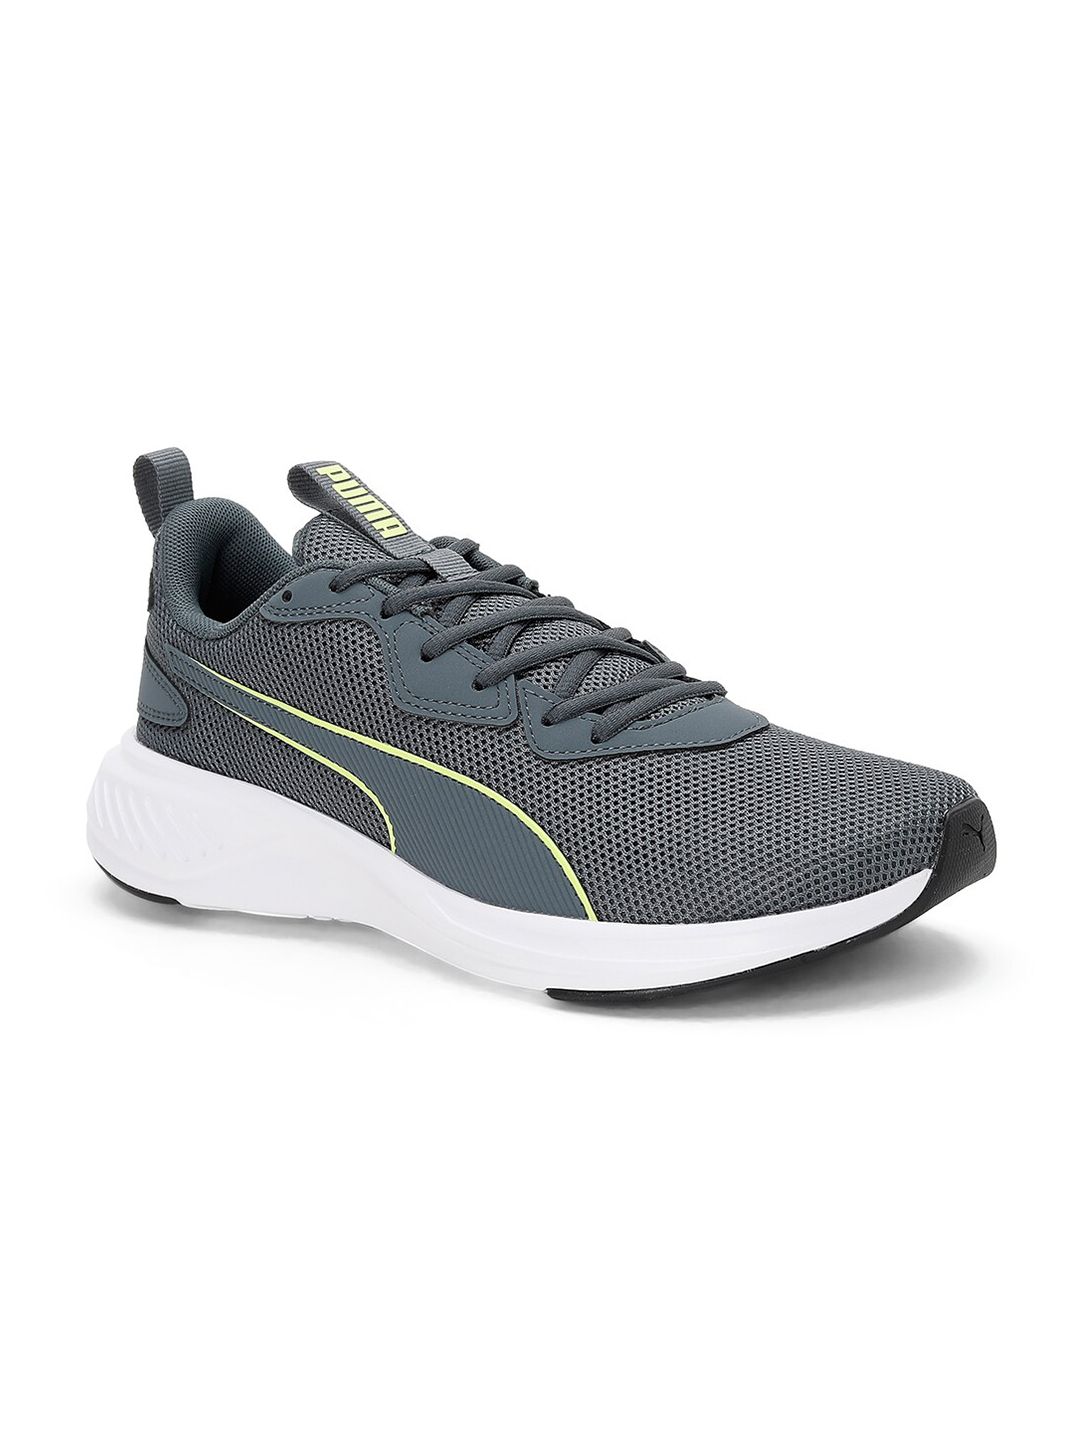 Puma Unisex Grey Incinerate Textile Running Shoes Price in India